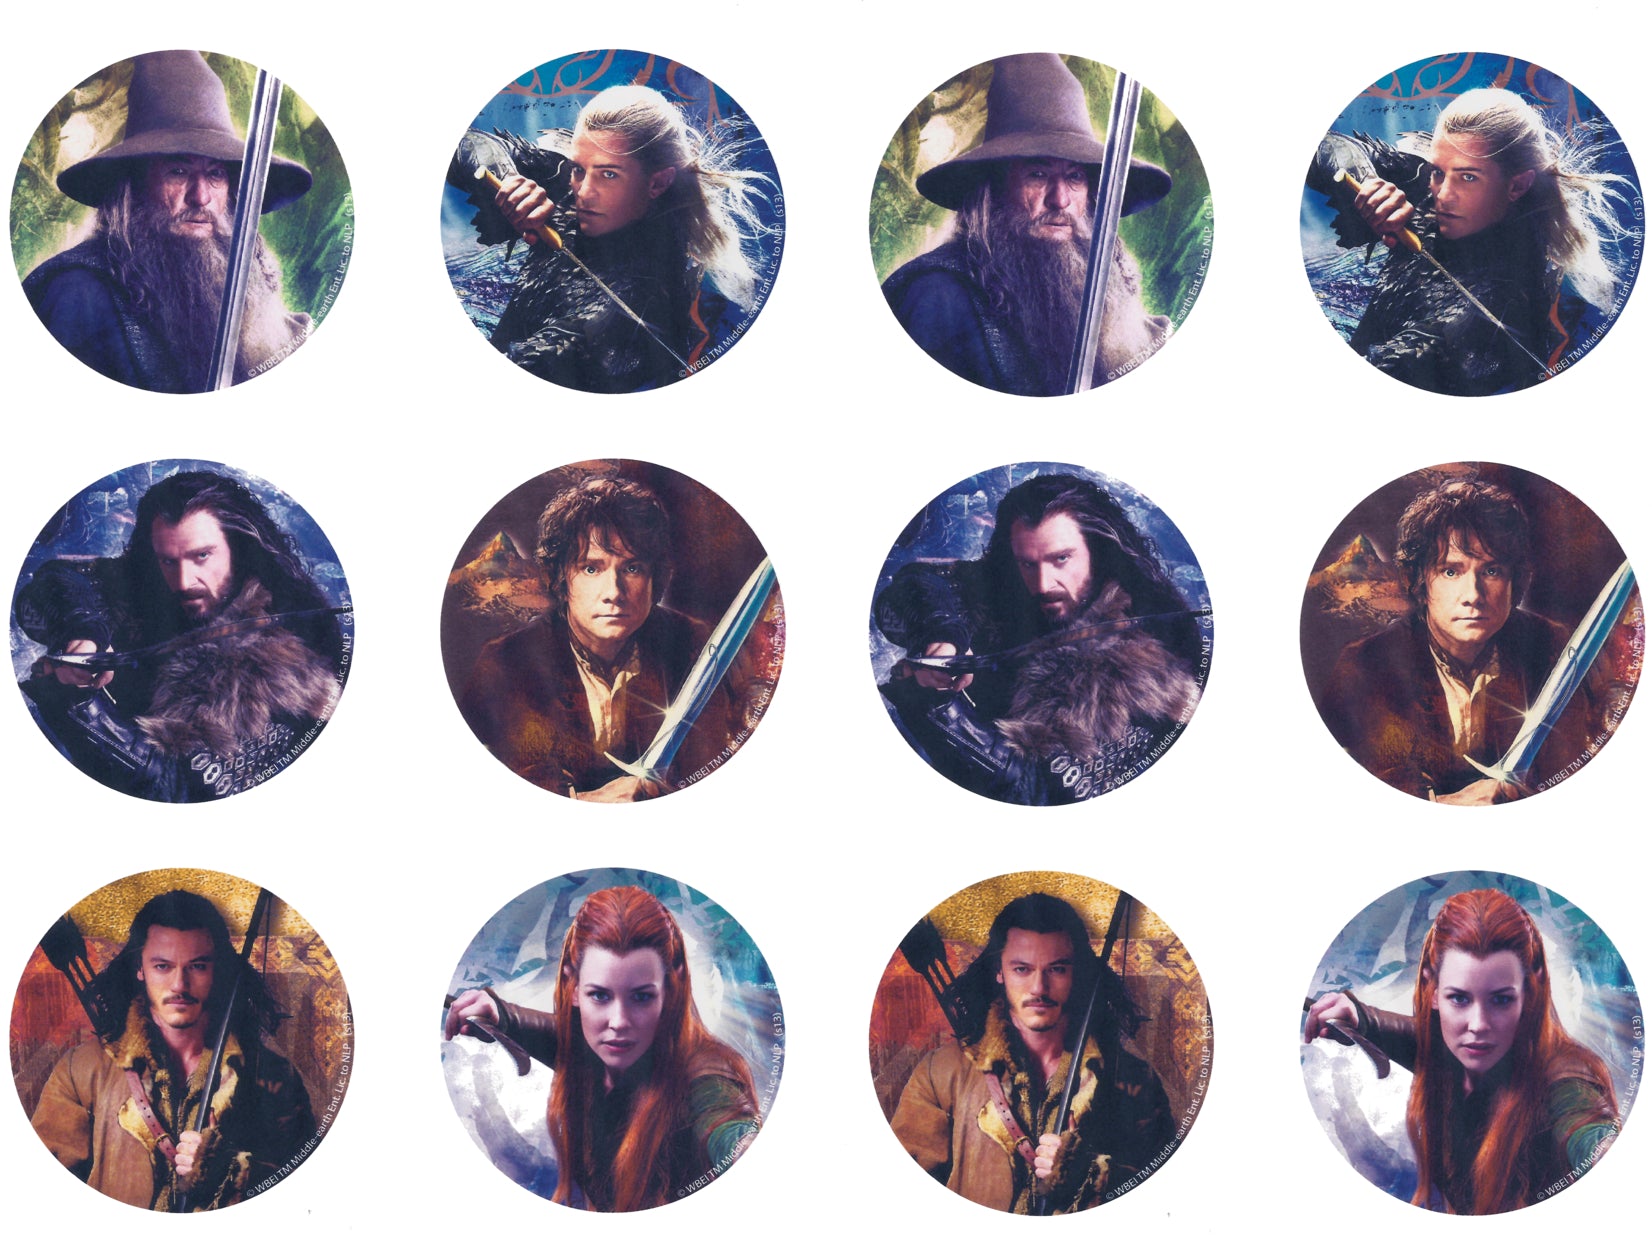 The Hobbit the Desolation of Smaug Edible Cupcake Topper Images ABPID03905